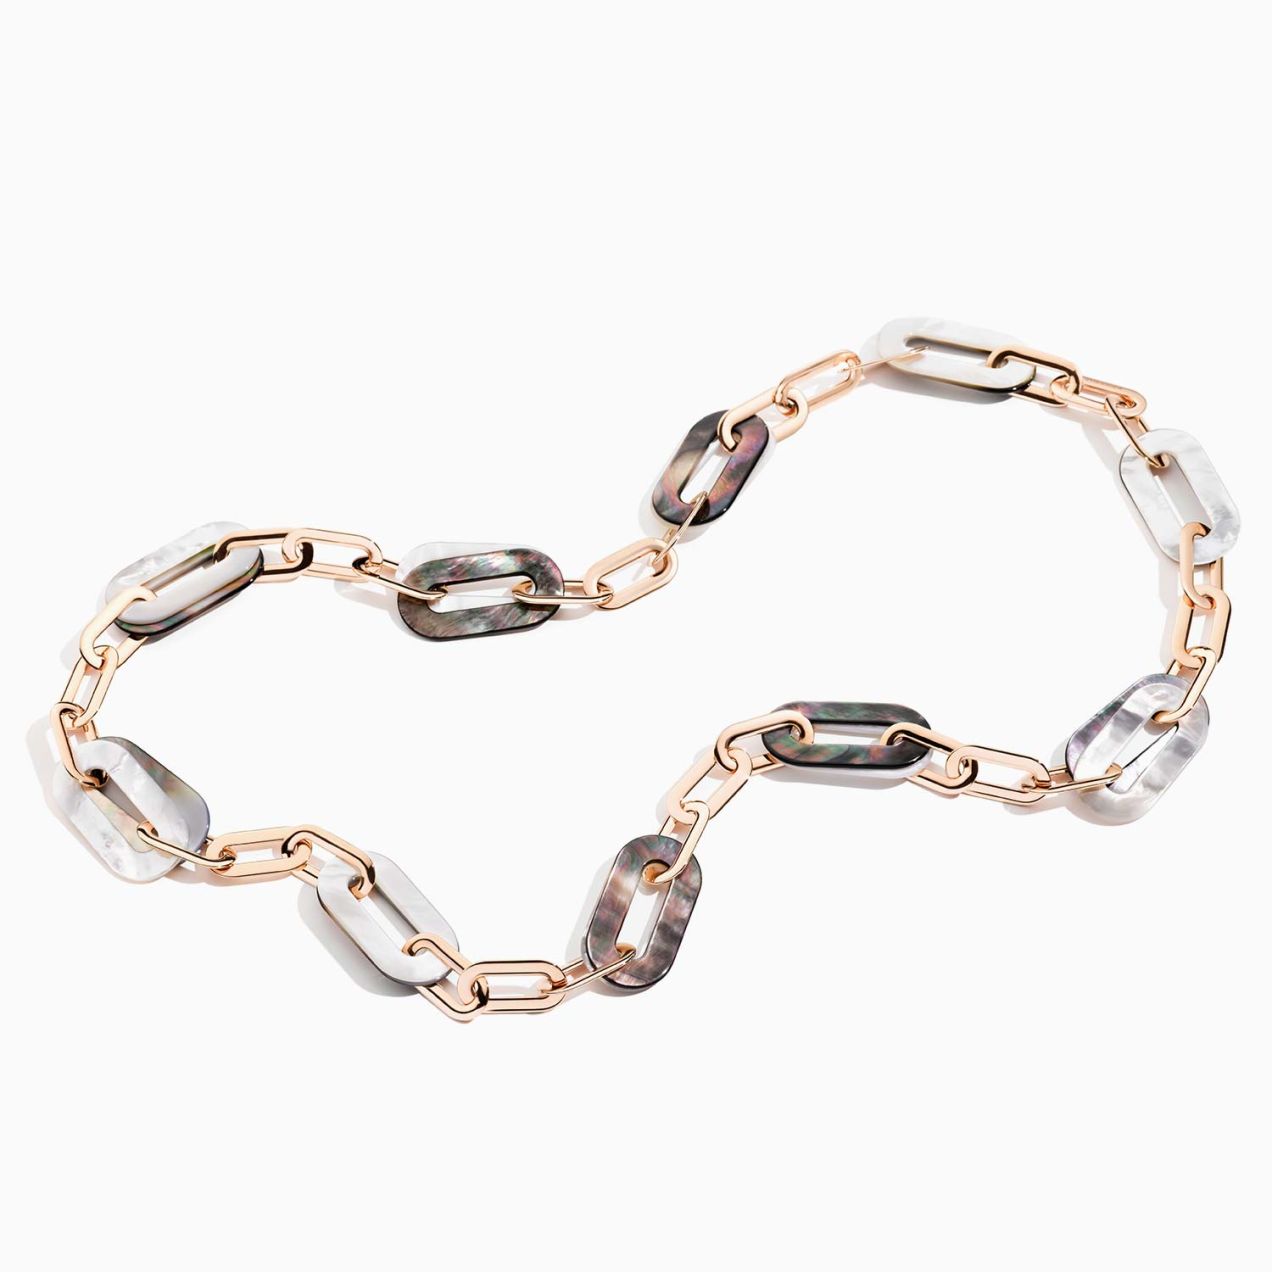 Vhernier bisquit chain necklace with white and gray mother of pearl